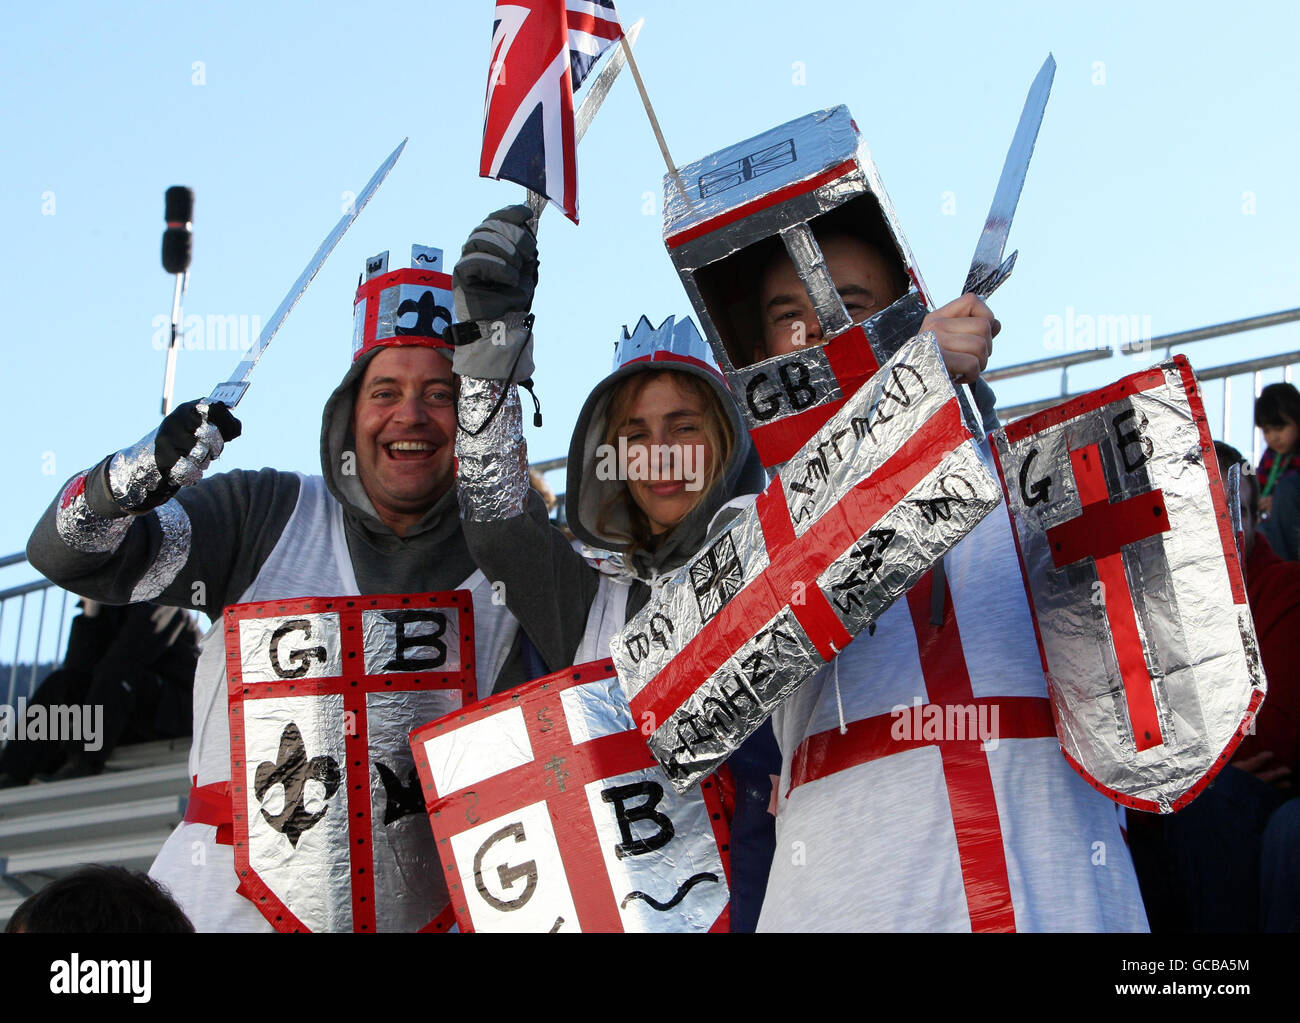 Great Britain fans before the third run in the Women's Skeleton at Whistler Sliding Centre, Whistler, Canada. Stock Photo